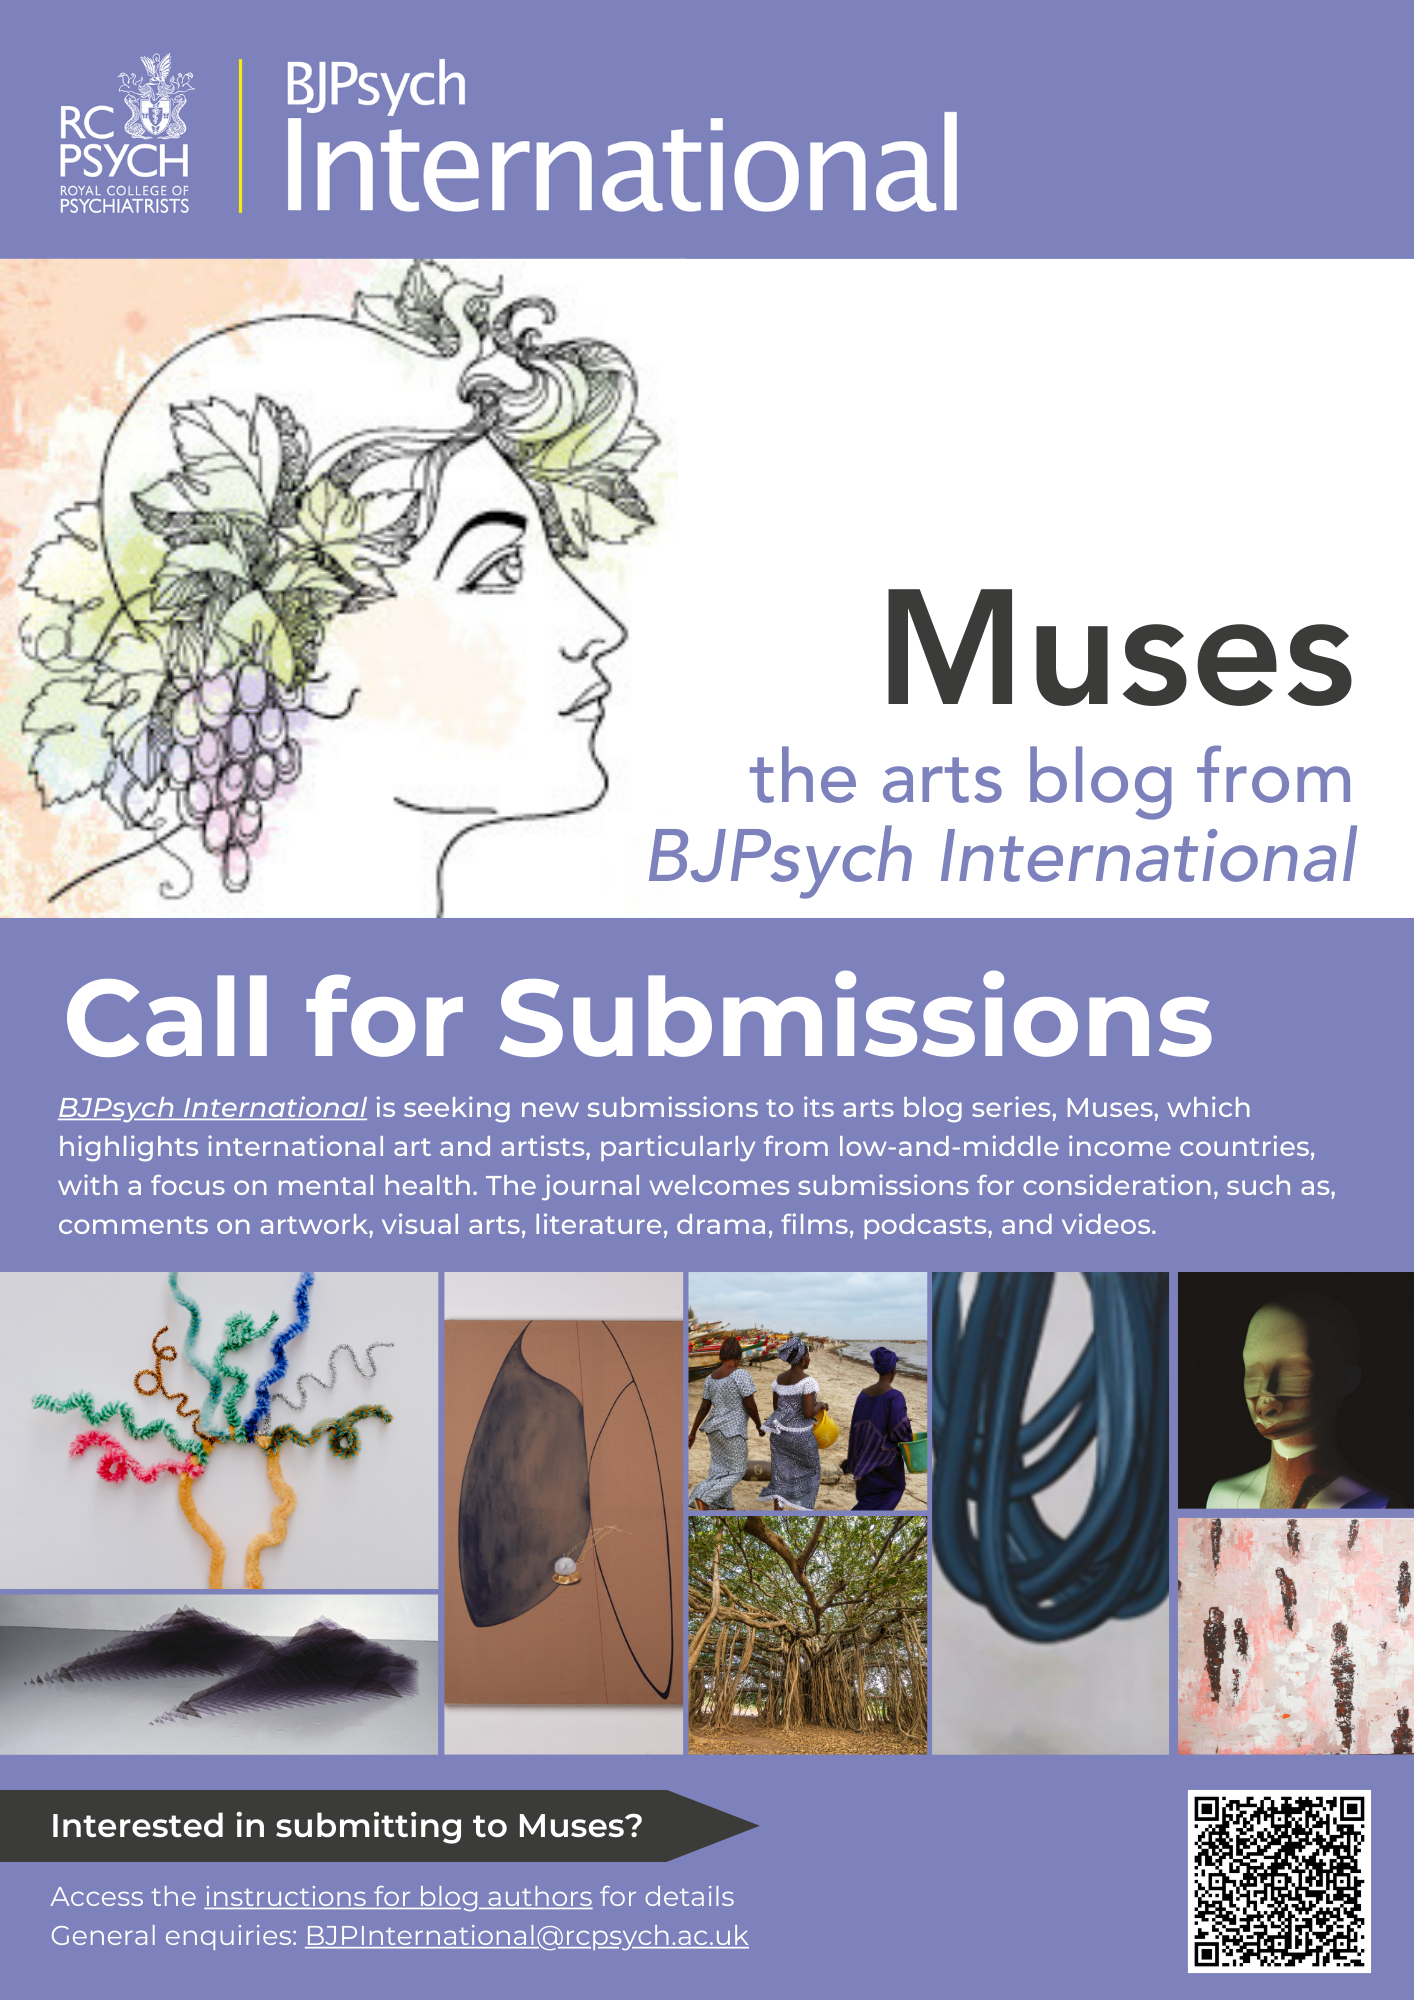 Call for submissions to Muses the arts blog